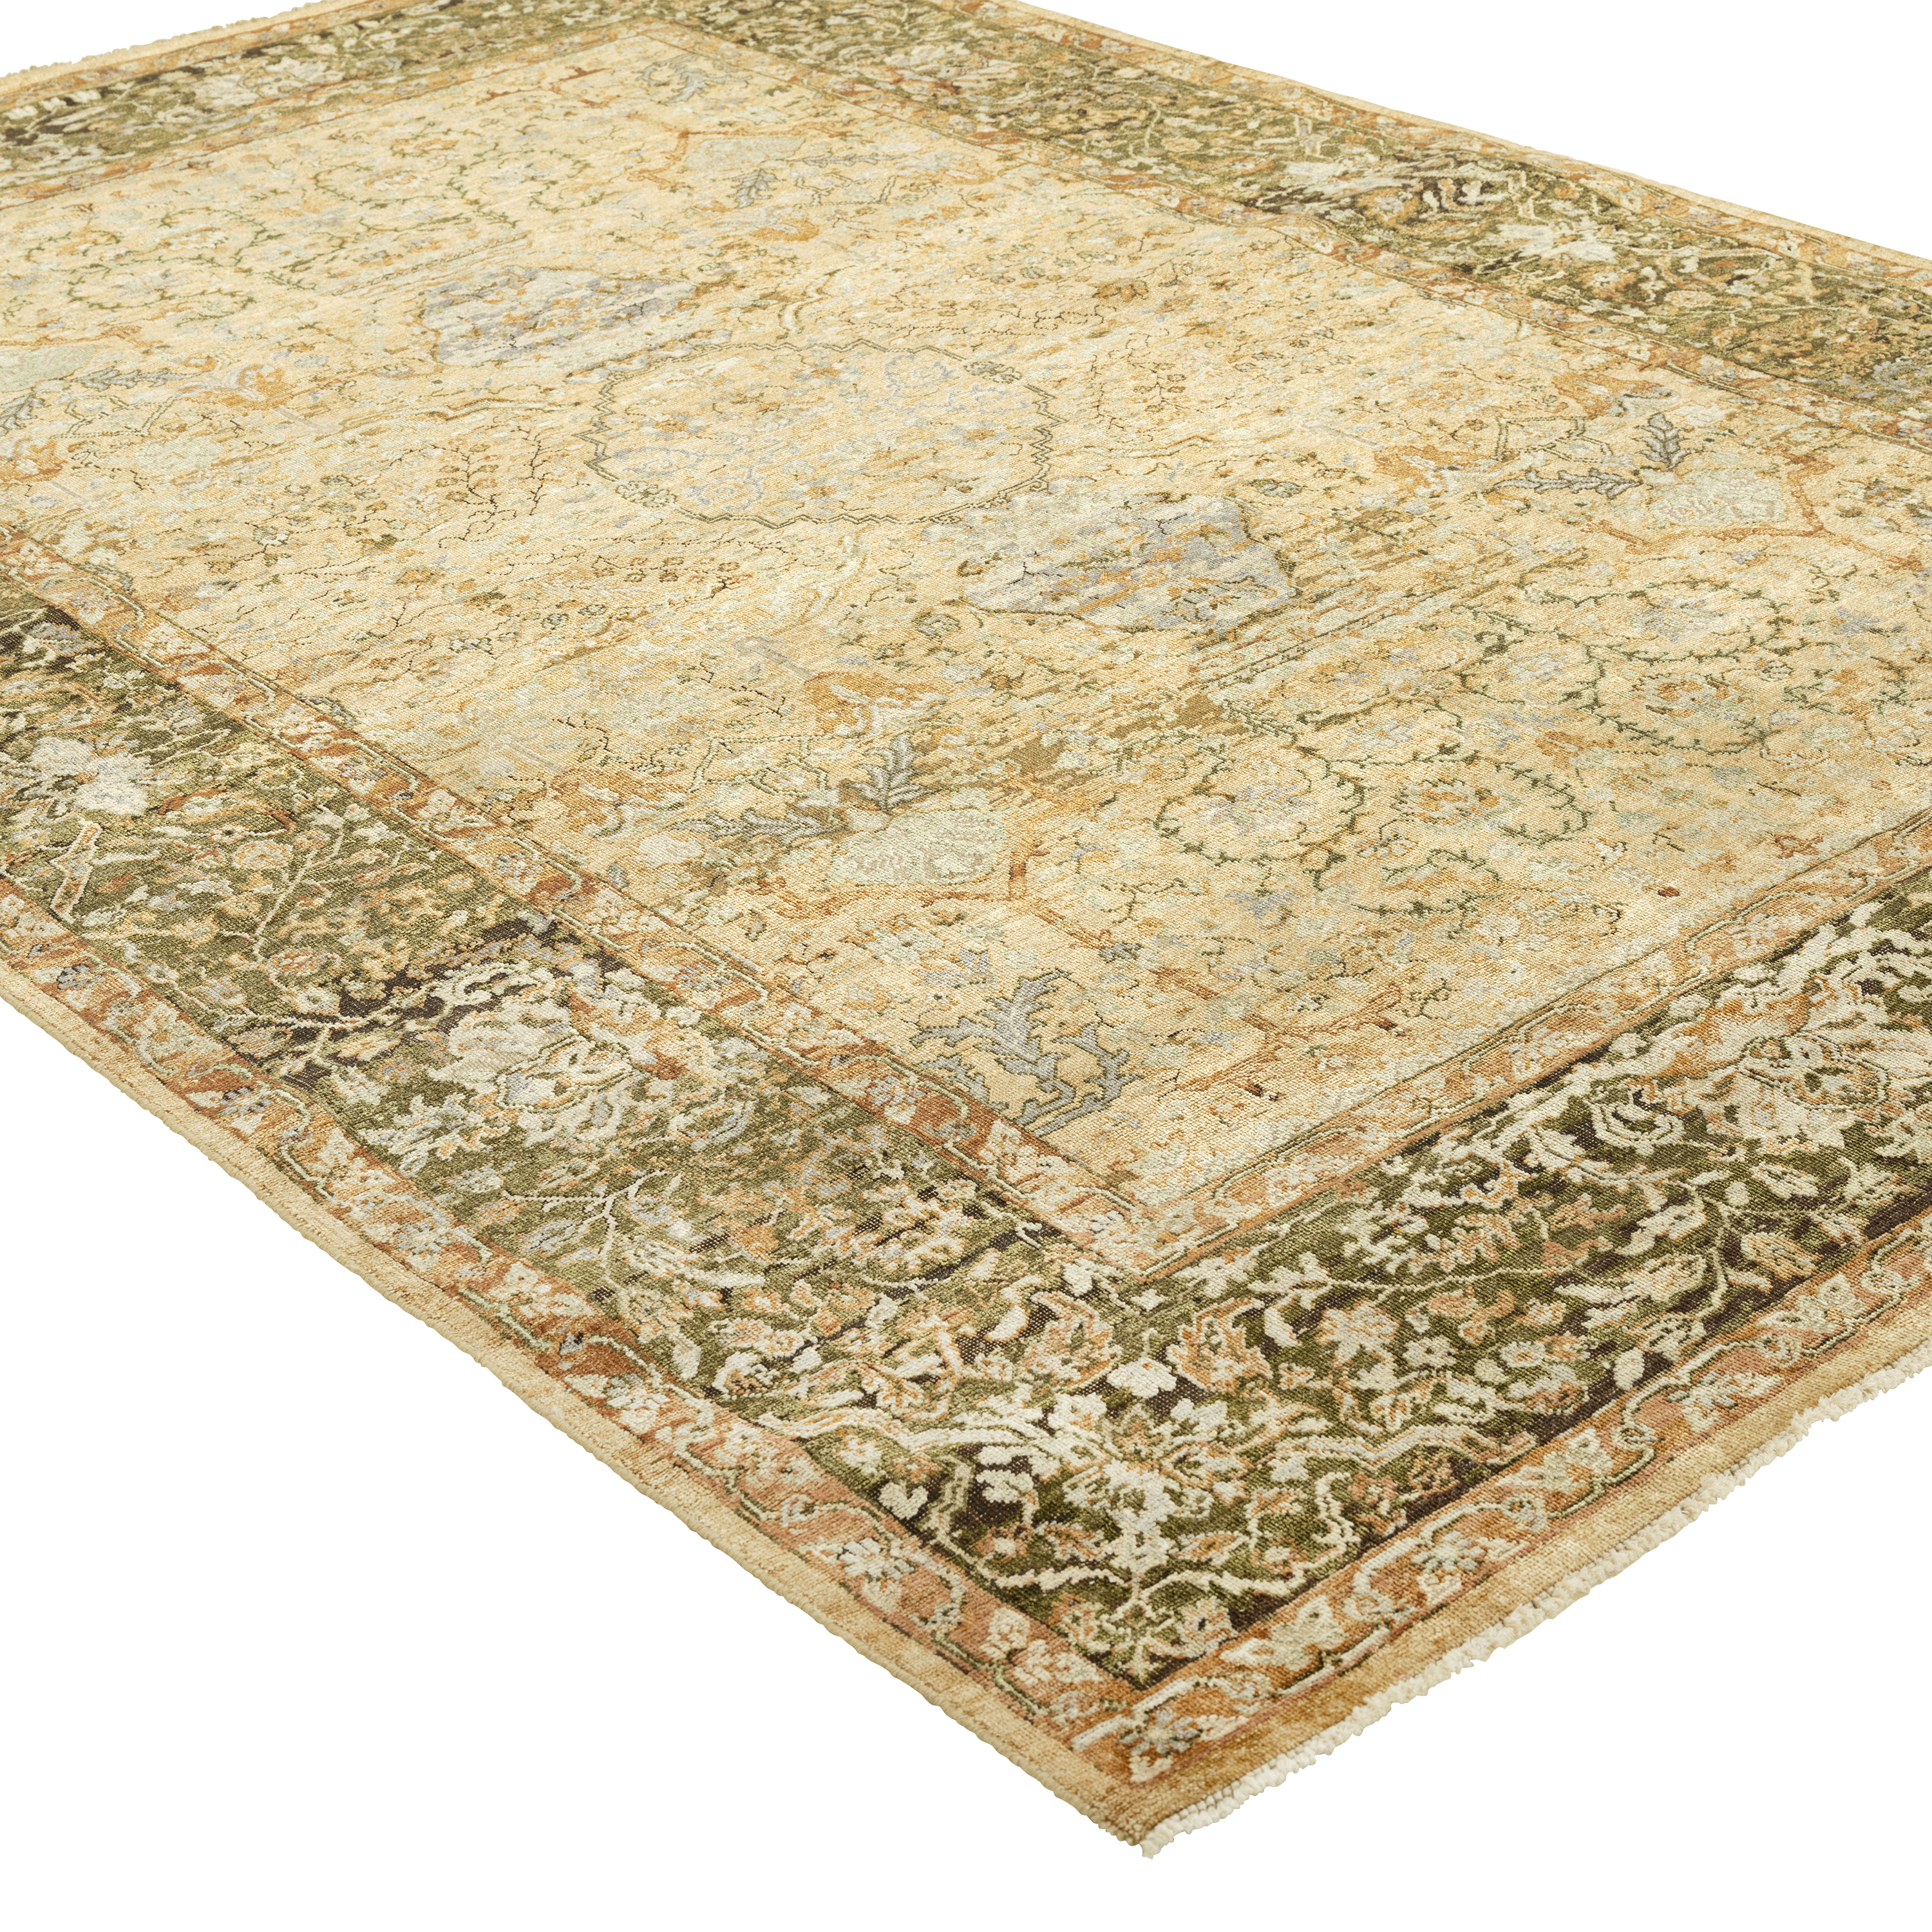 Traditional Hand-Knotted Rug - 6' x 9' Default Title